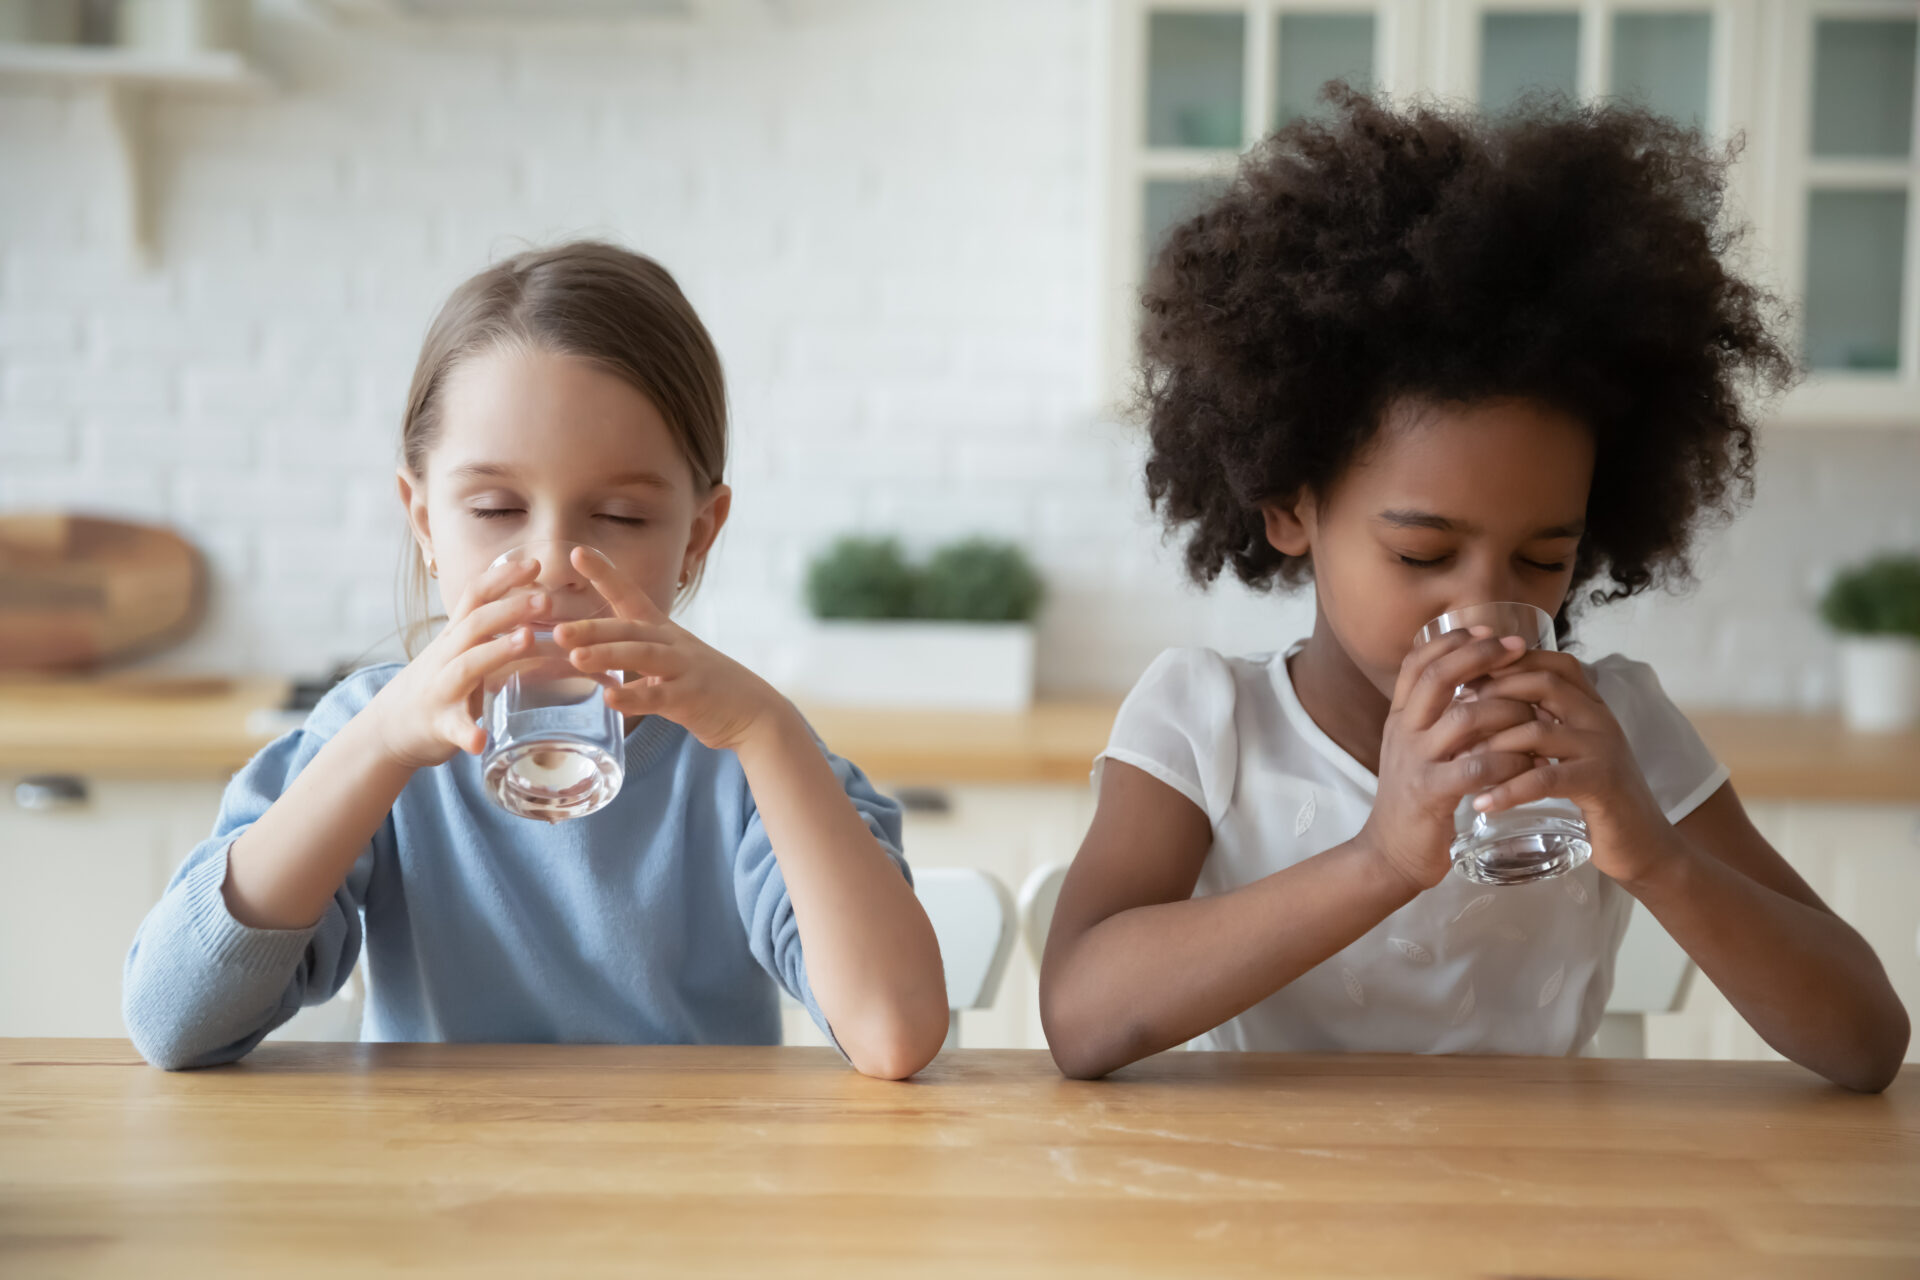 Two multi-ethnic dehydrated little girls reducing thirst drinking natural clean water seated at table in domestic kitchen. Healthy lifestyle, good life habit, daily body organism refreshment concept